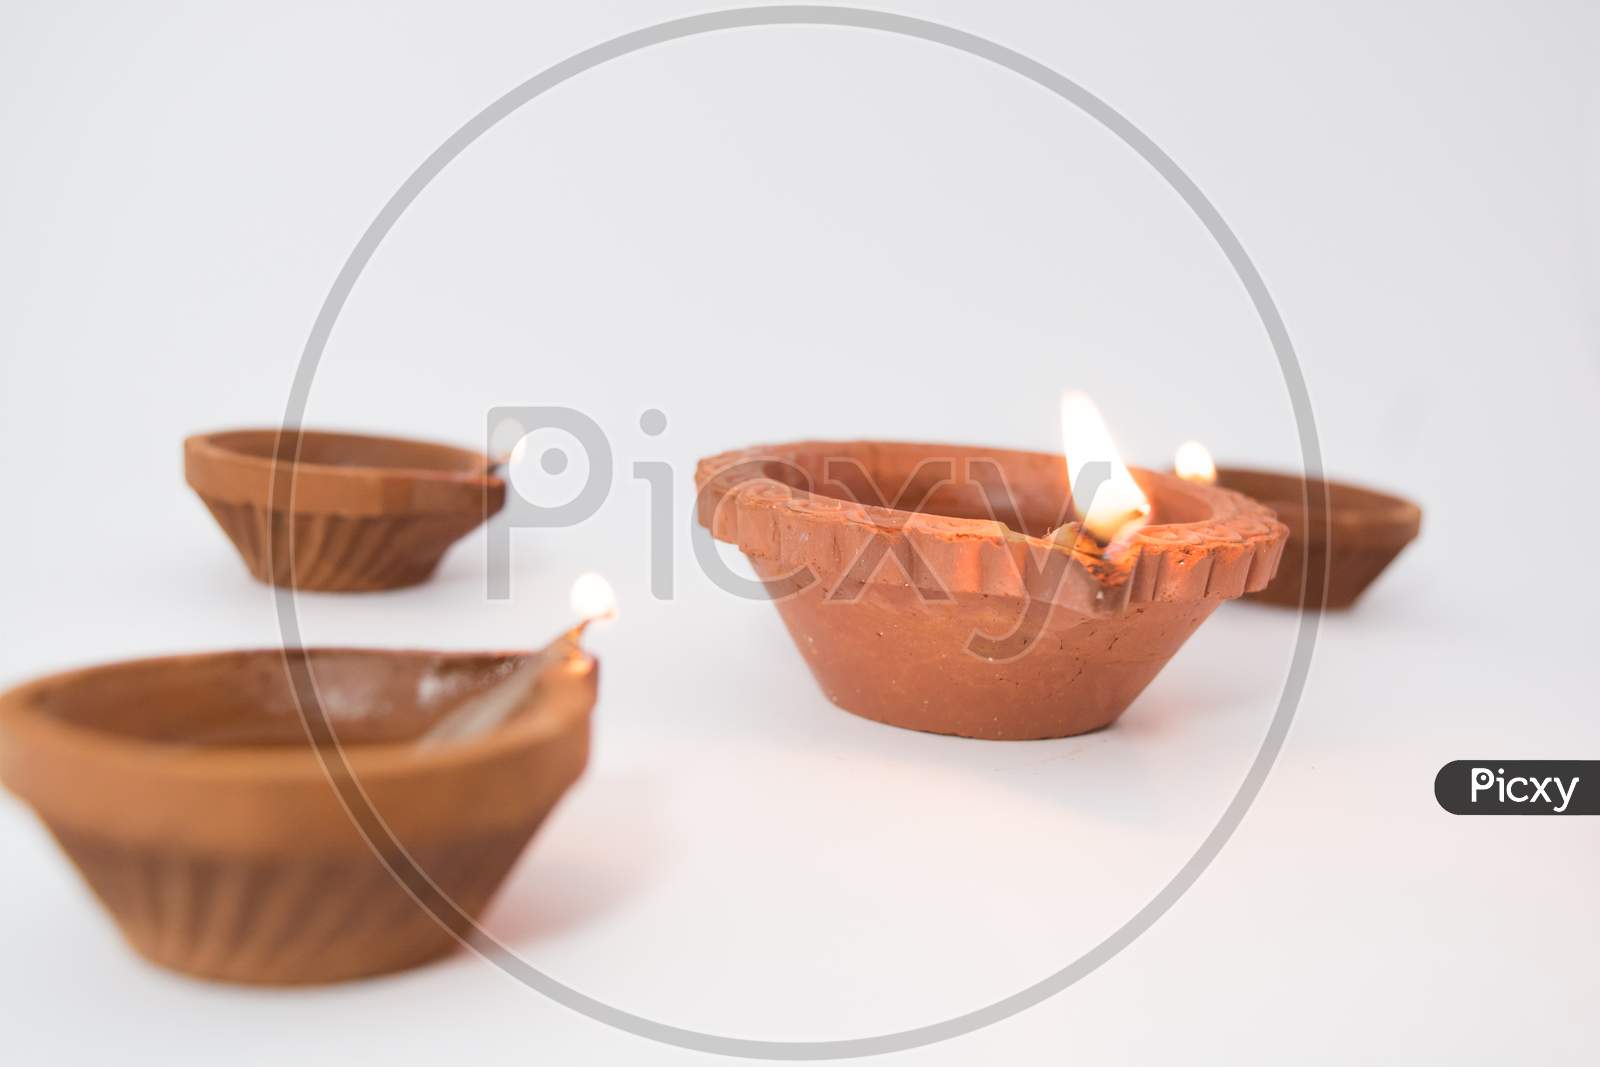 Closeup Of Diwali Terracotta Diyas On isolated  Background Which Are Used Lighting Up The House During Diwali Times